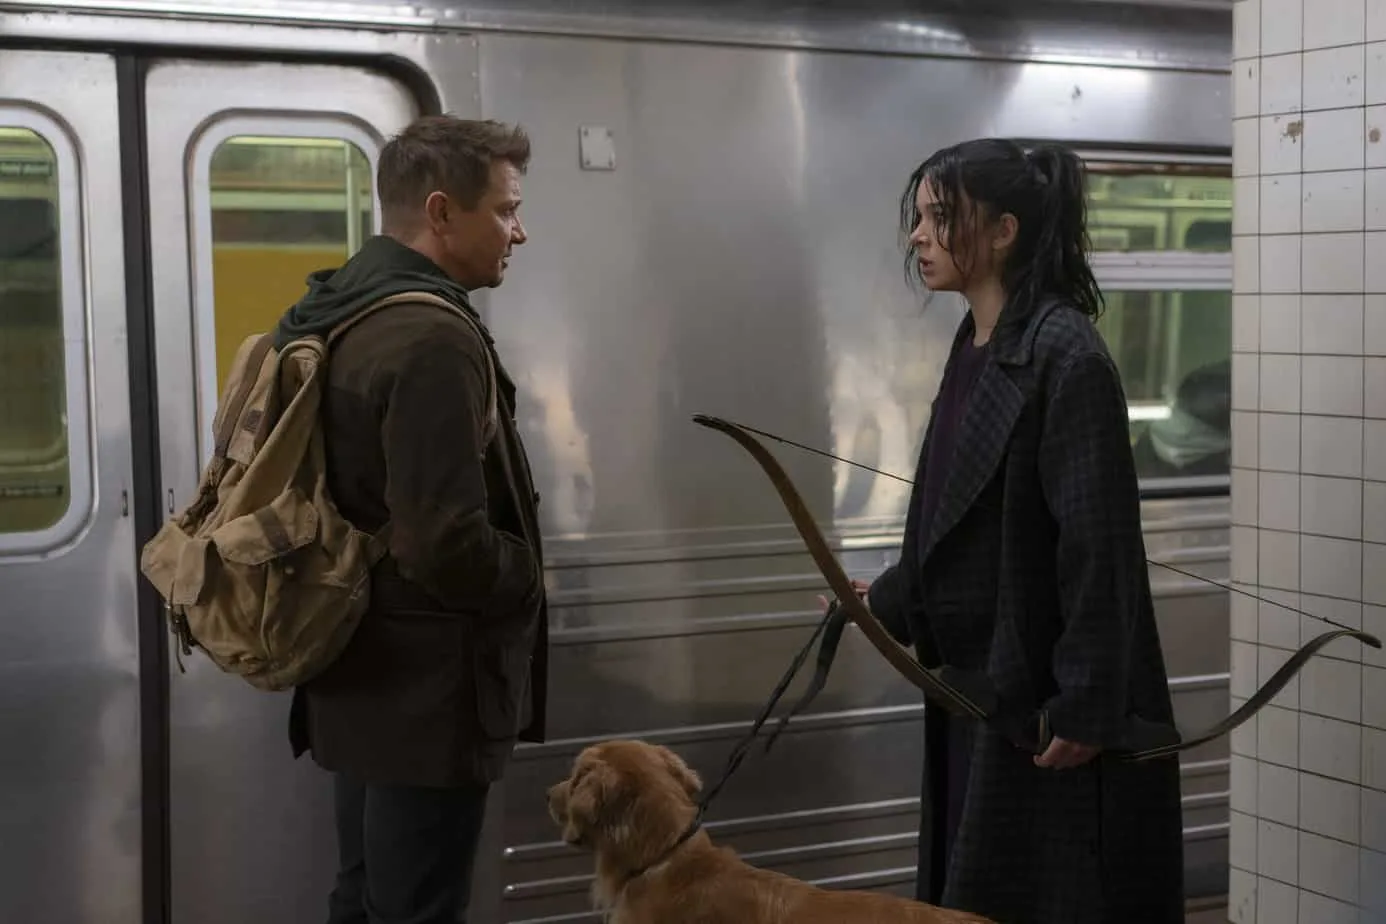 lines from Kate Bishop in Hawkeye. Clint, Kate, and dog lucky in front of subway